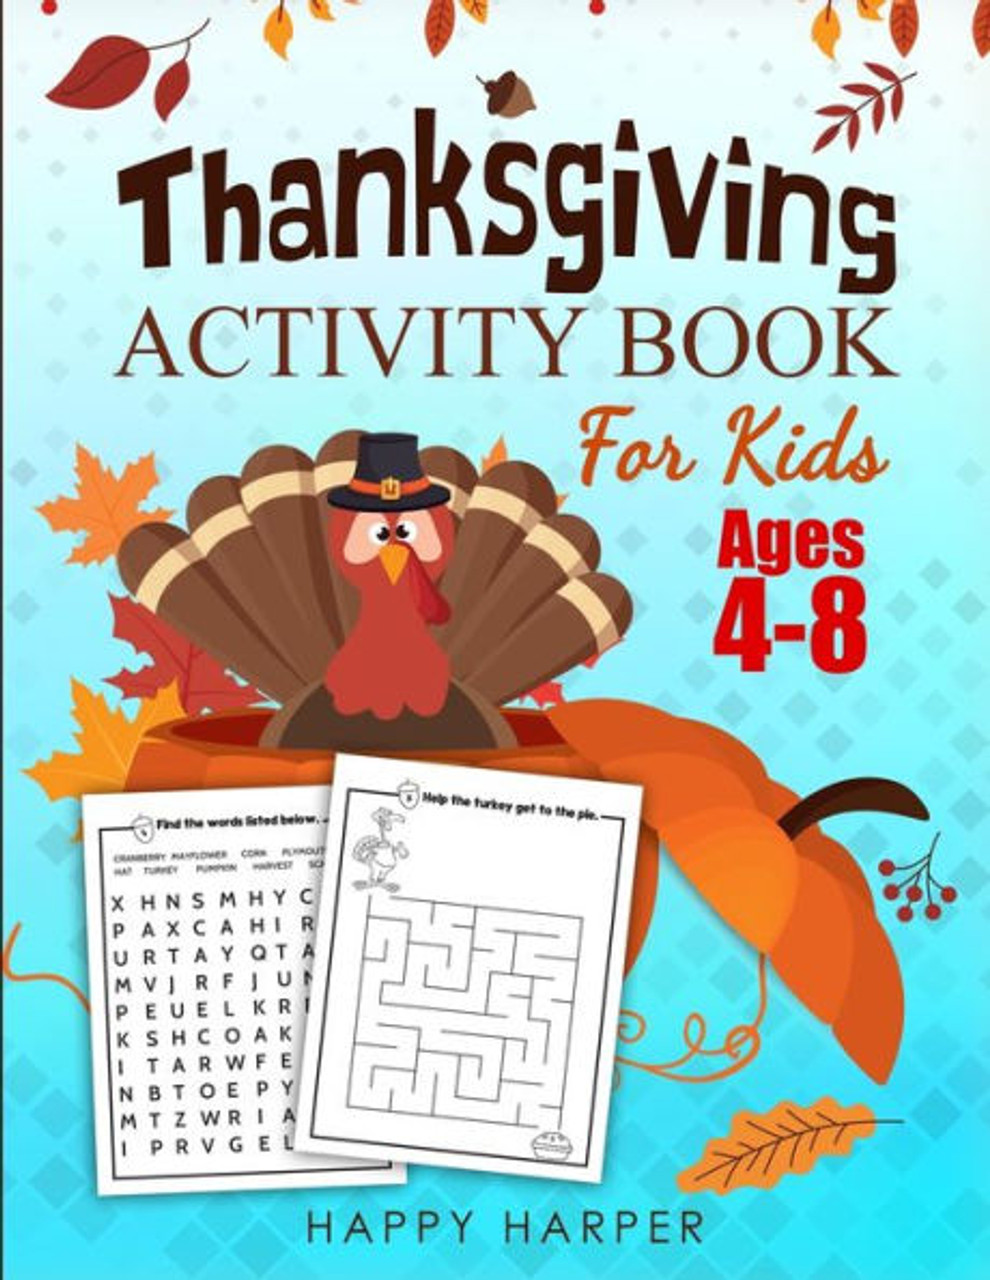 Thanksgiving activity book for kids ages